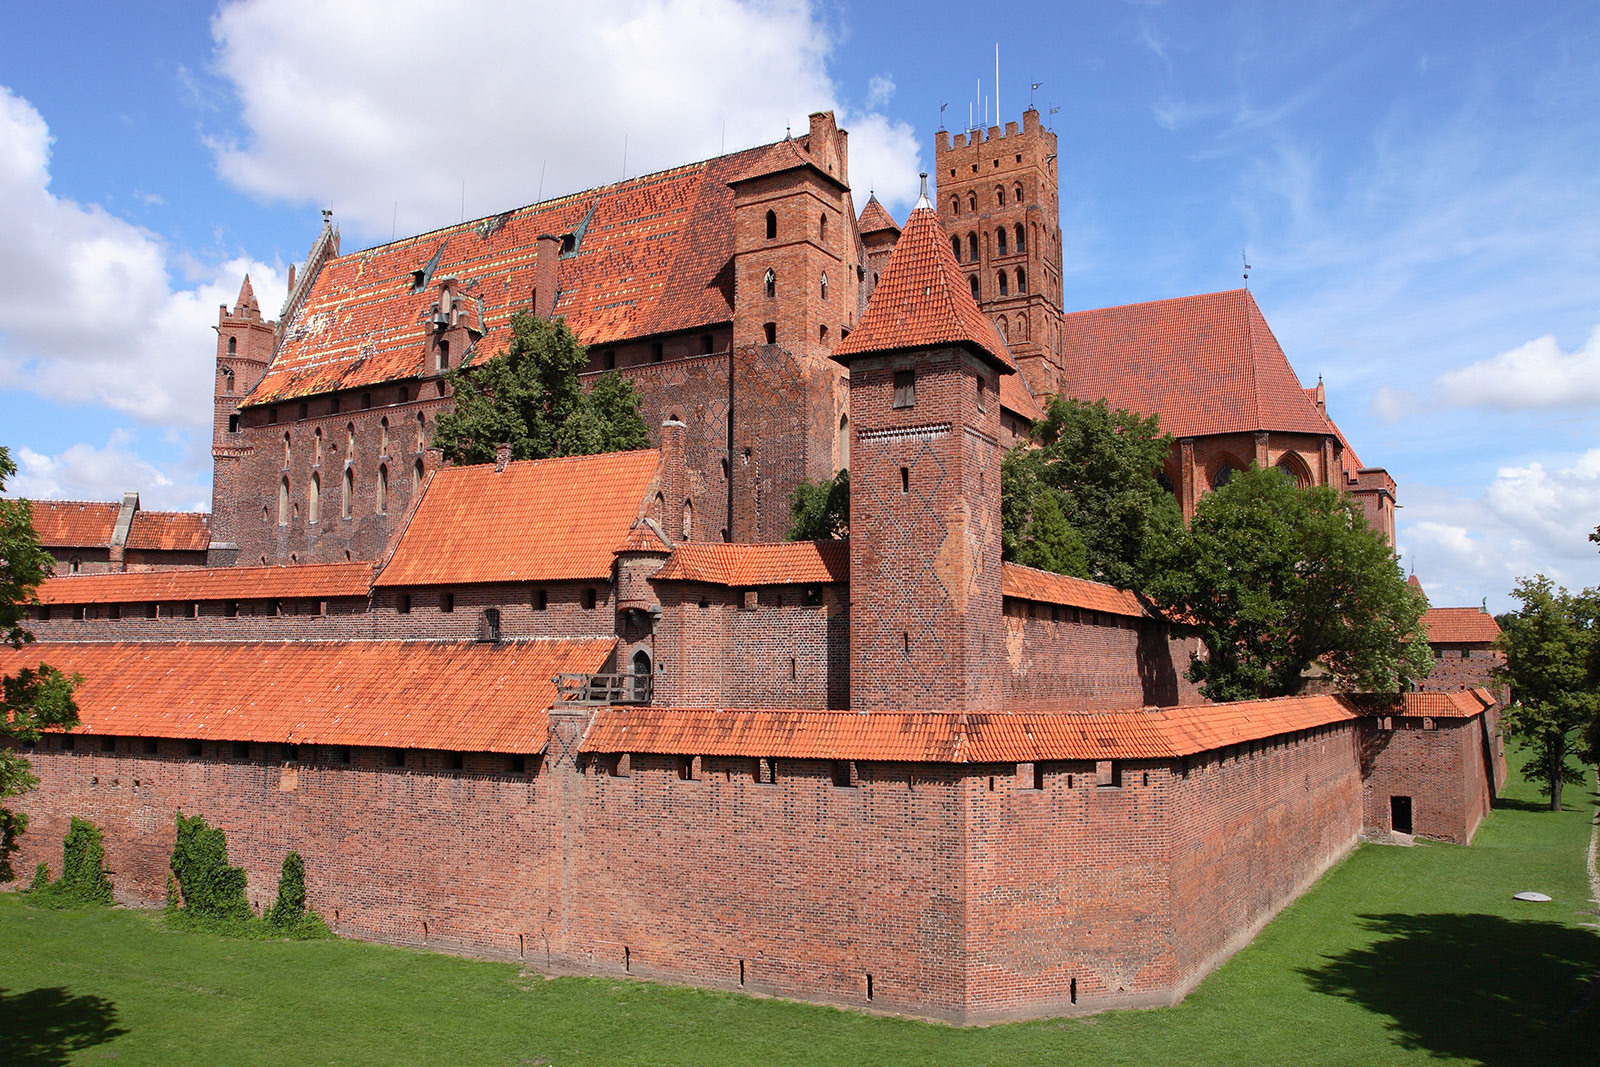 Malbork Castle, the Prussian headquarters of the Teutonic Knights.